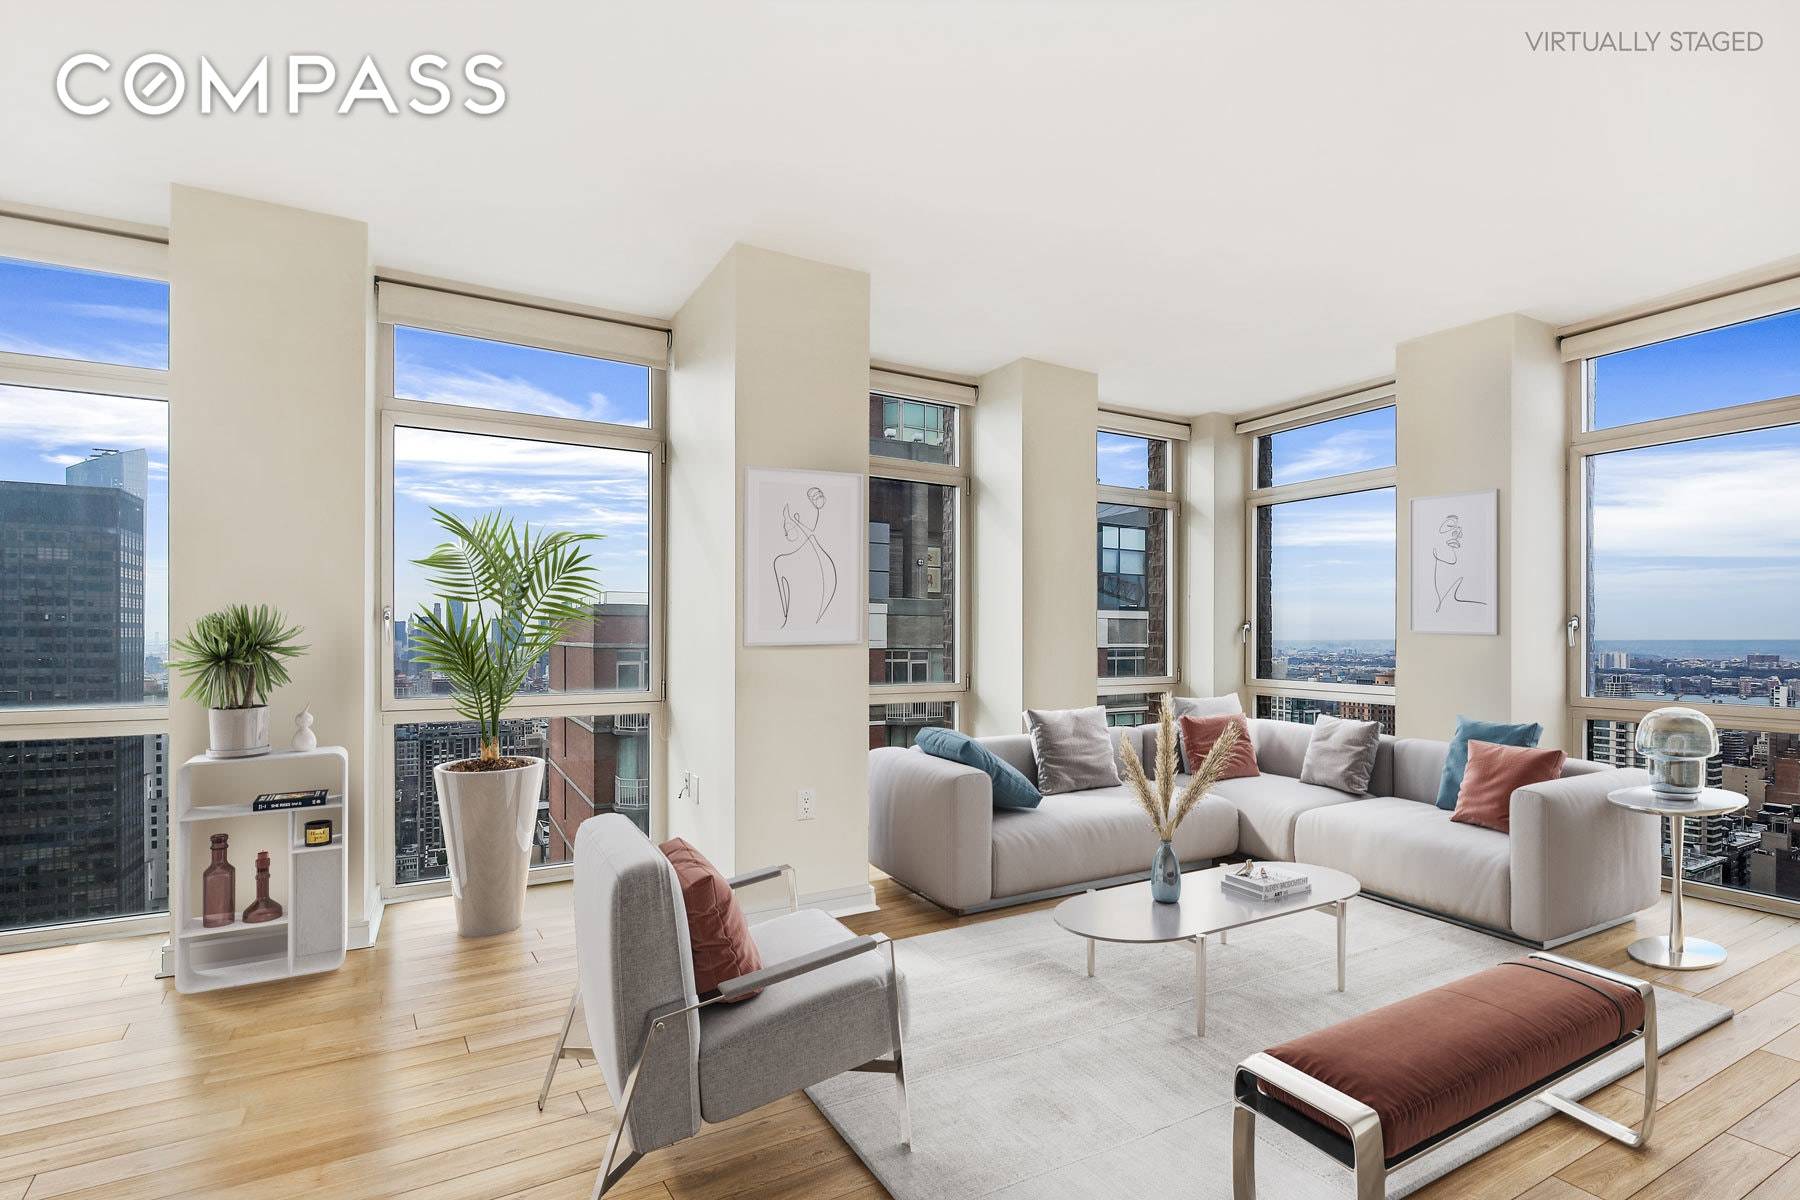 Must see this extraordinary 2 3 bedroom condo with 360 degree stunning VIEWS.